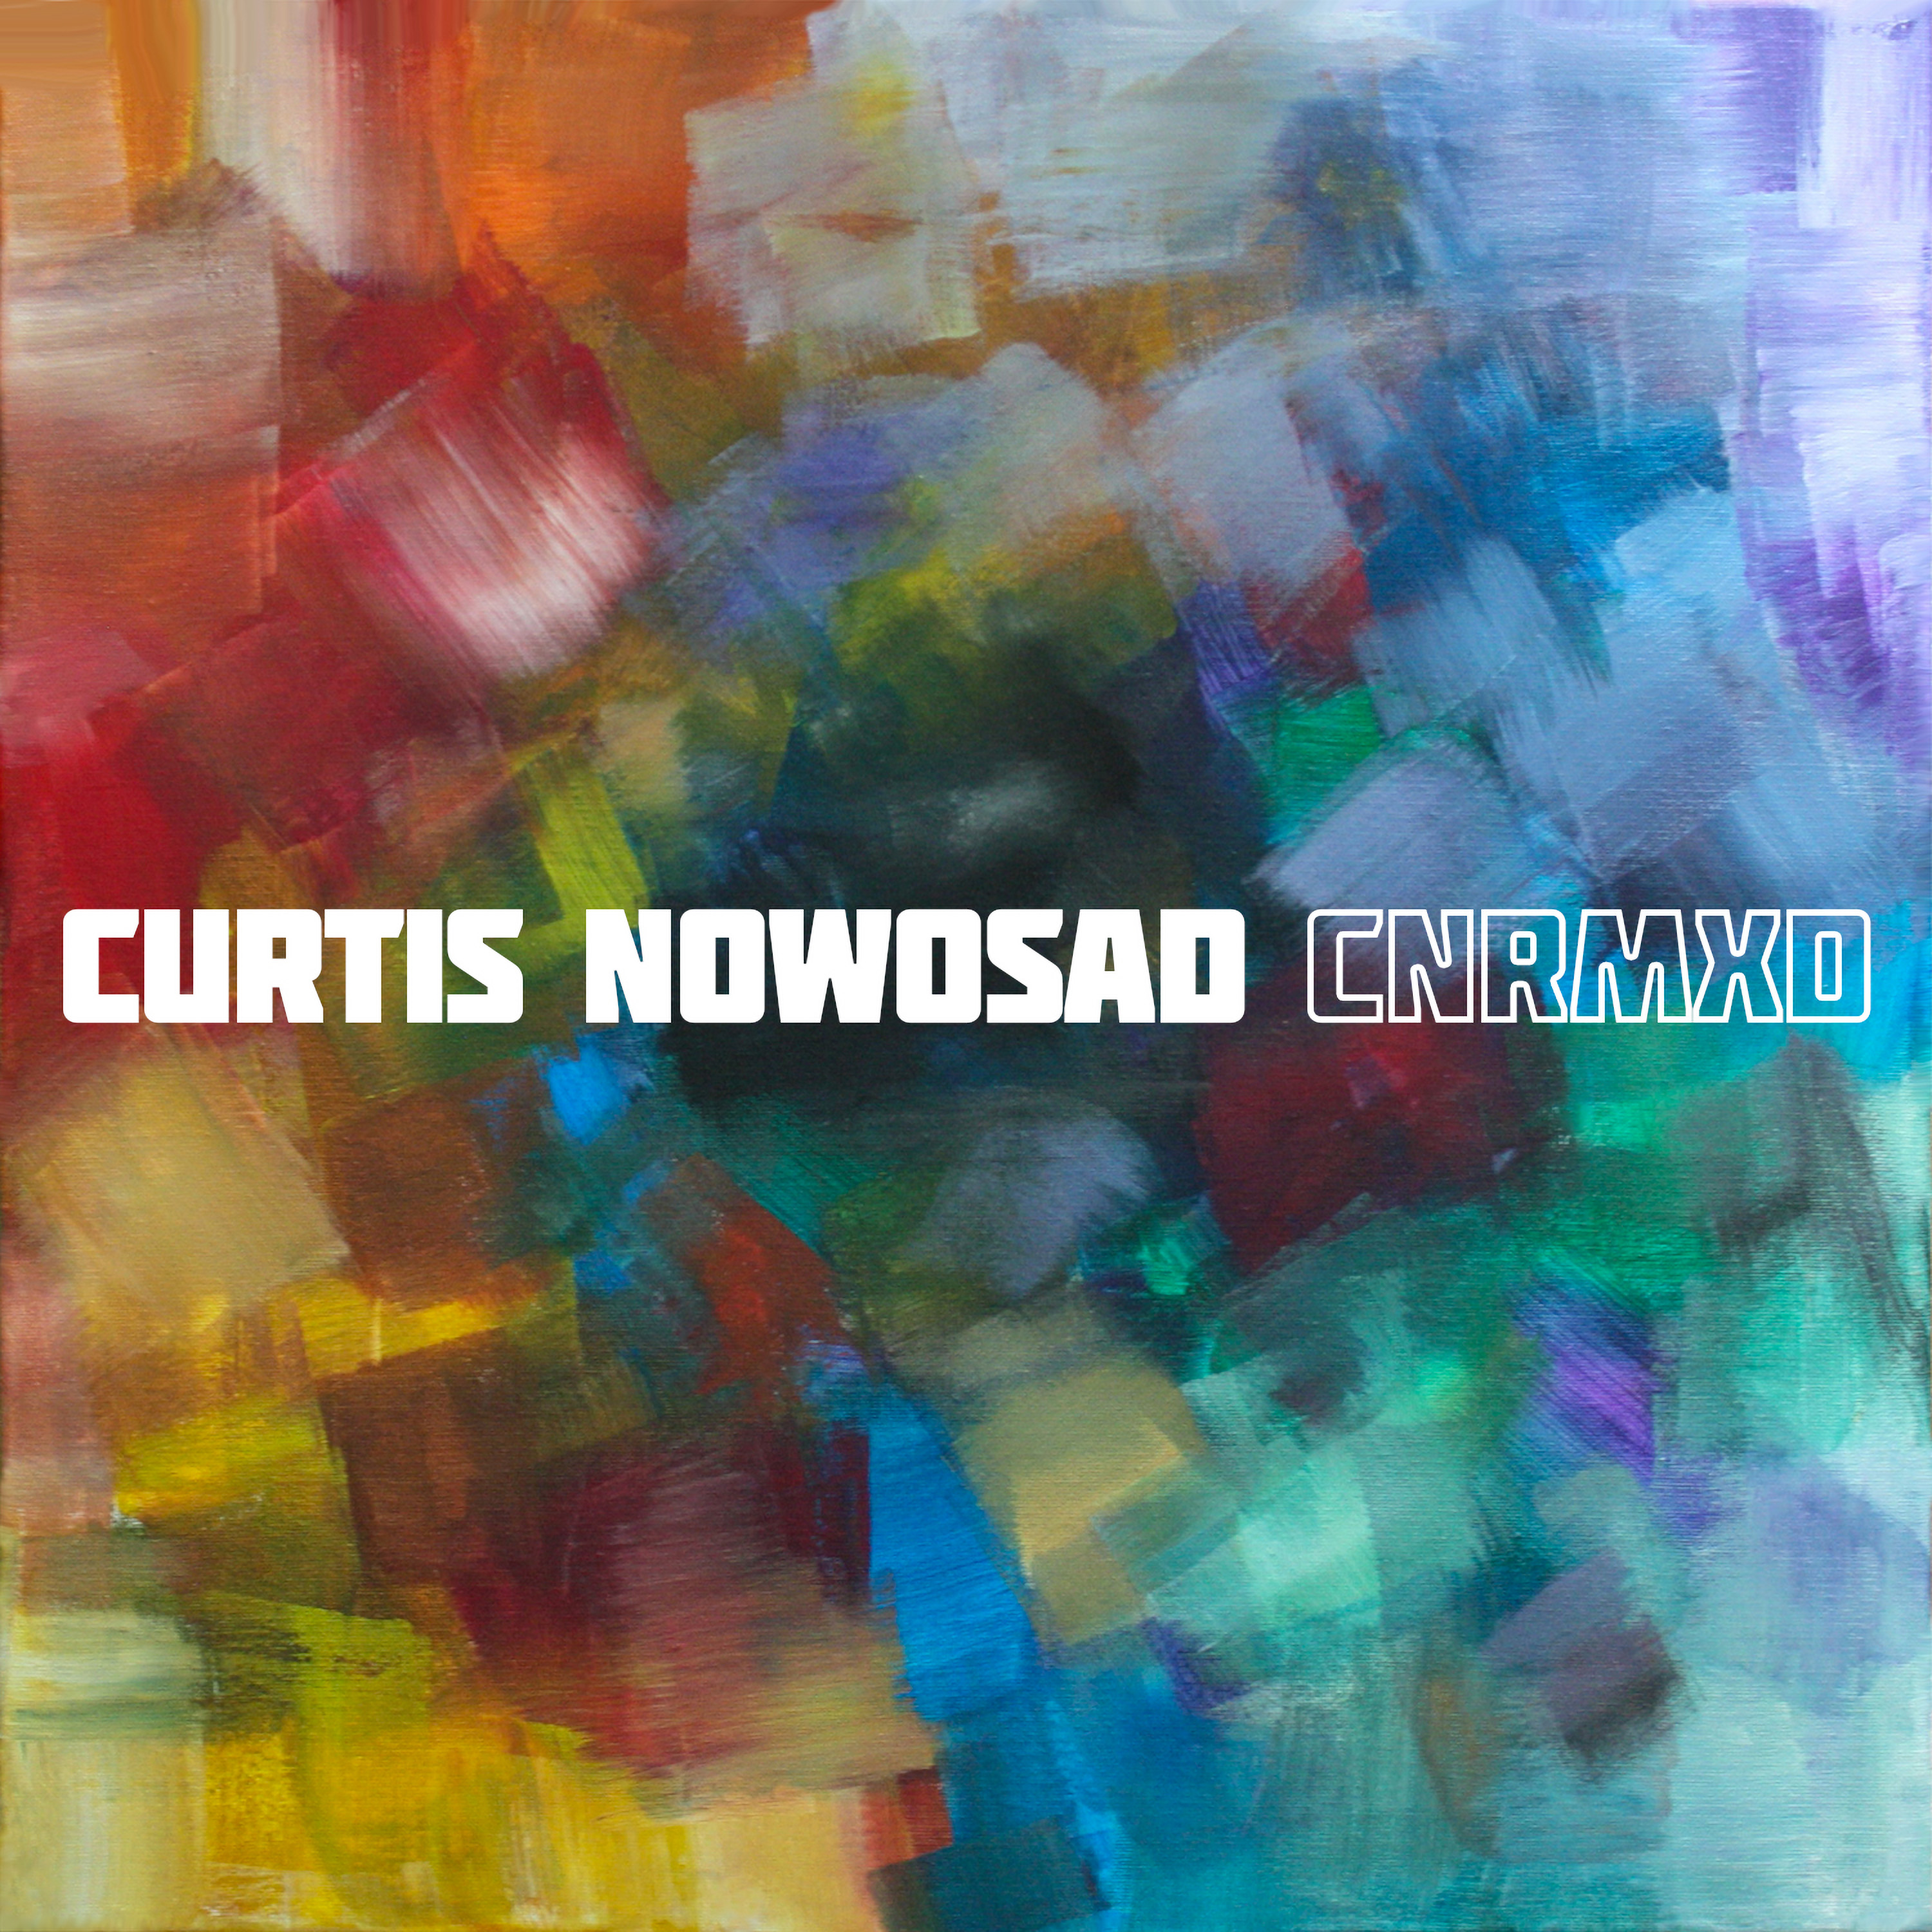 Art for Curtis Nowosad Jazz from Gallery 41 ID by Curtis Nowosad